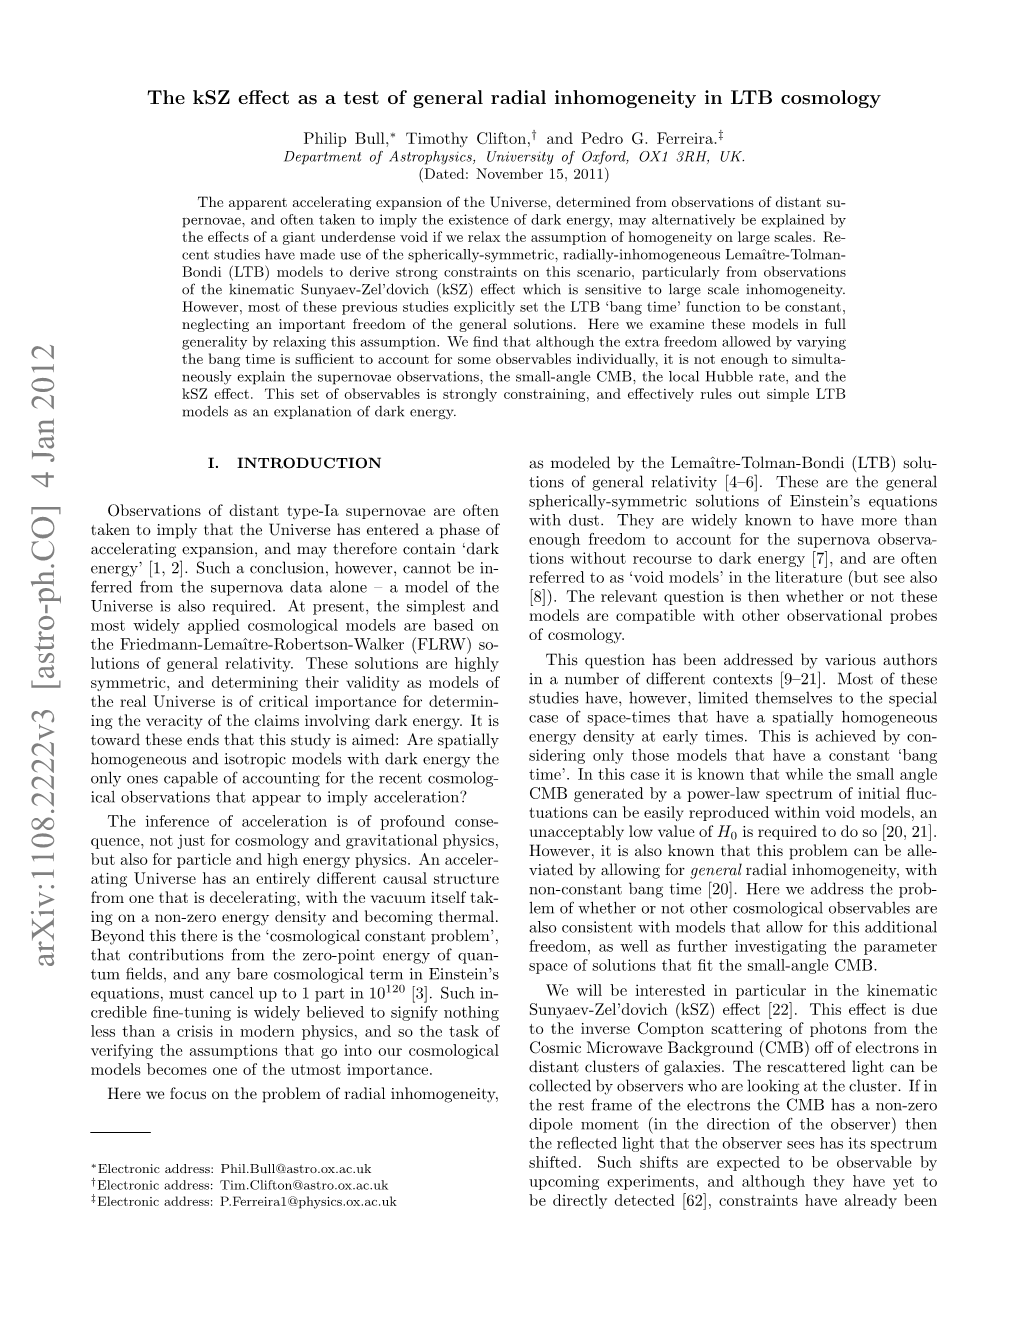 Arxiv:1108.2222V3 [Astro-Ph.CO] 4 Jan 2012 Space of Solutions That ﬁt the Small-Angle CMB